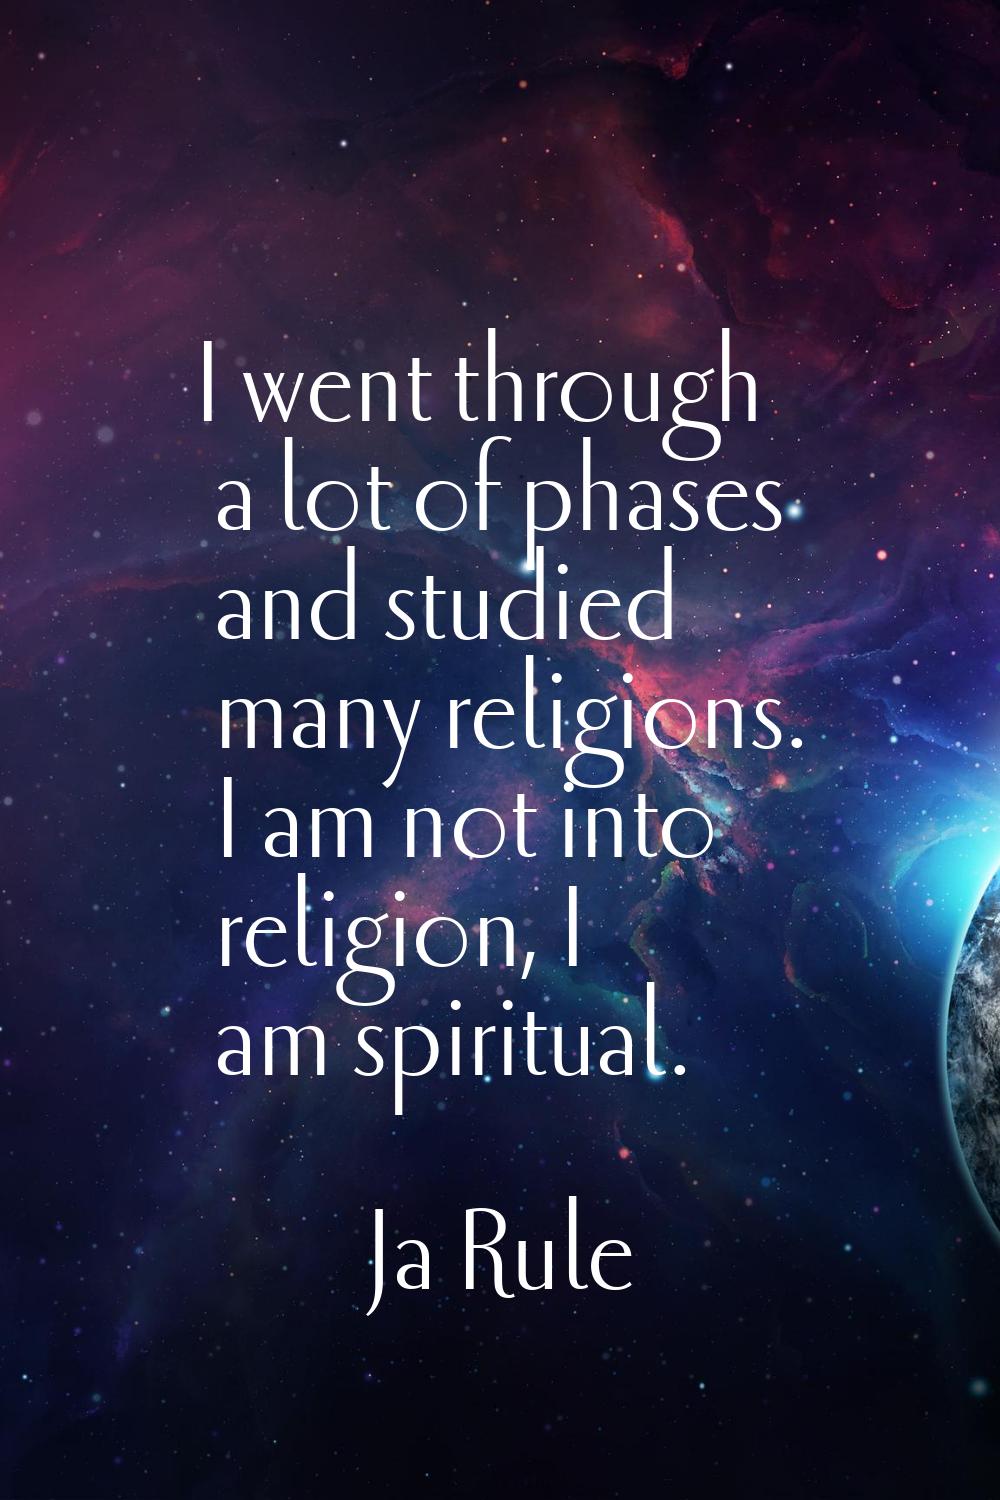 I went through a lot of phases and studied many religions. I am not into religion, I am spiritual.